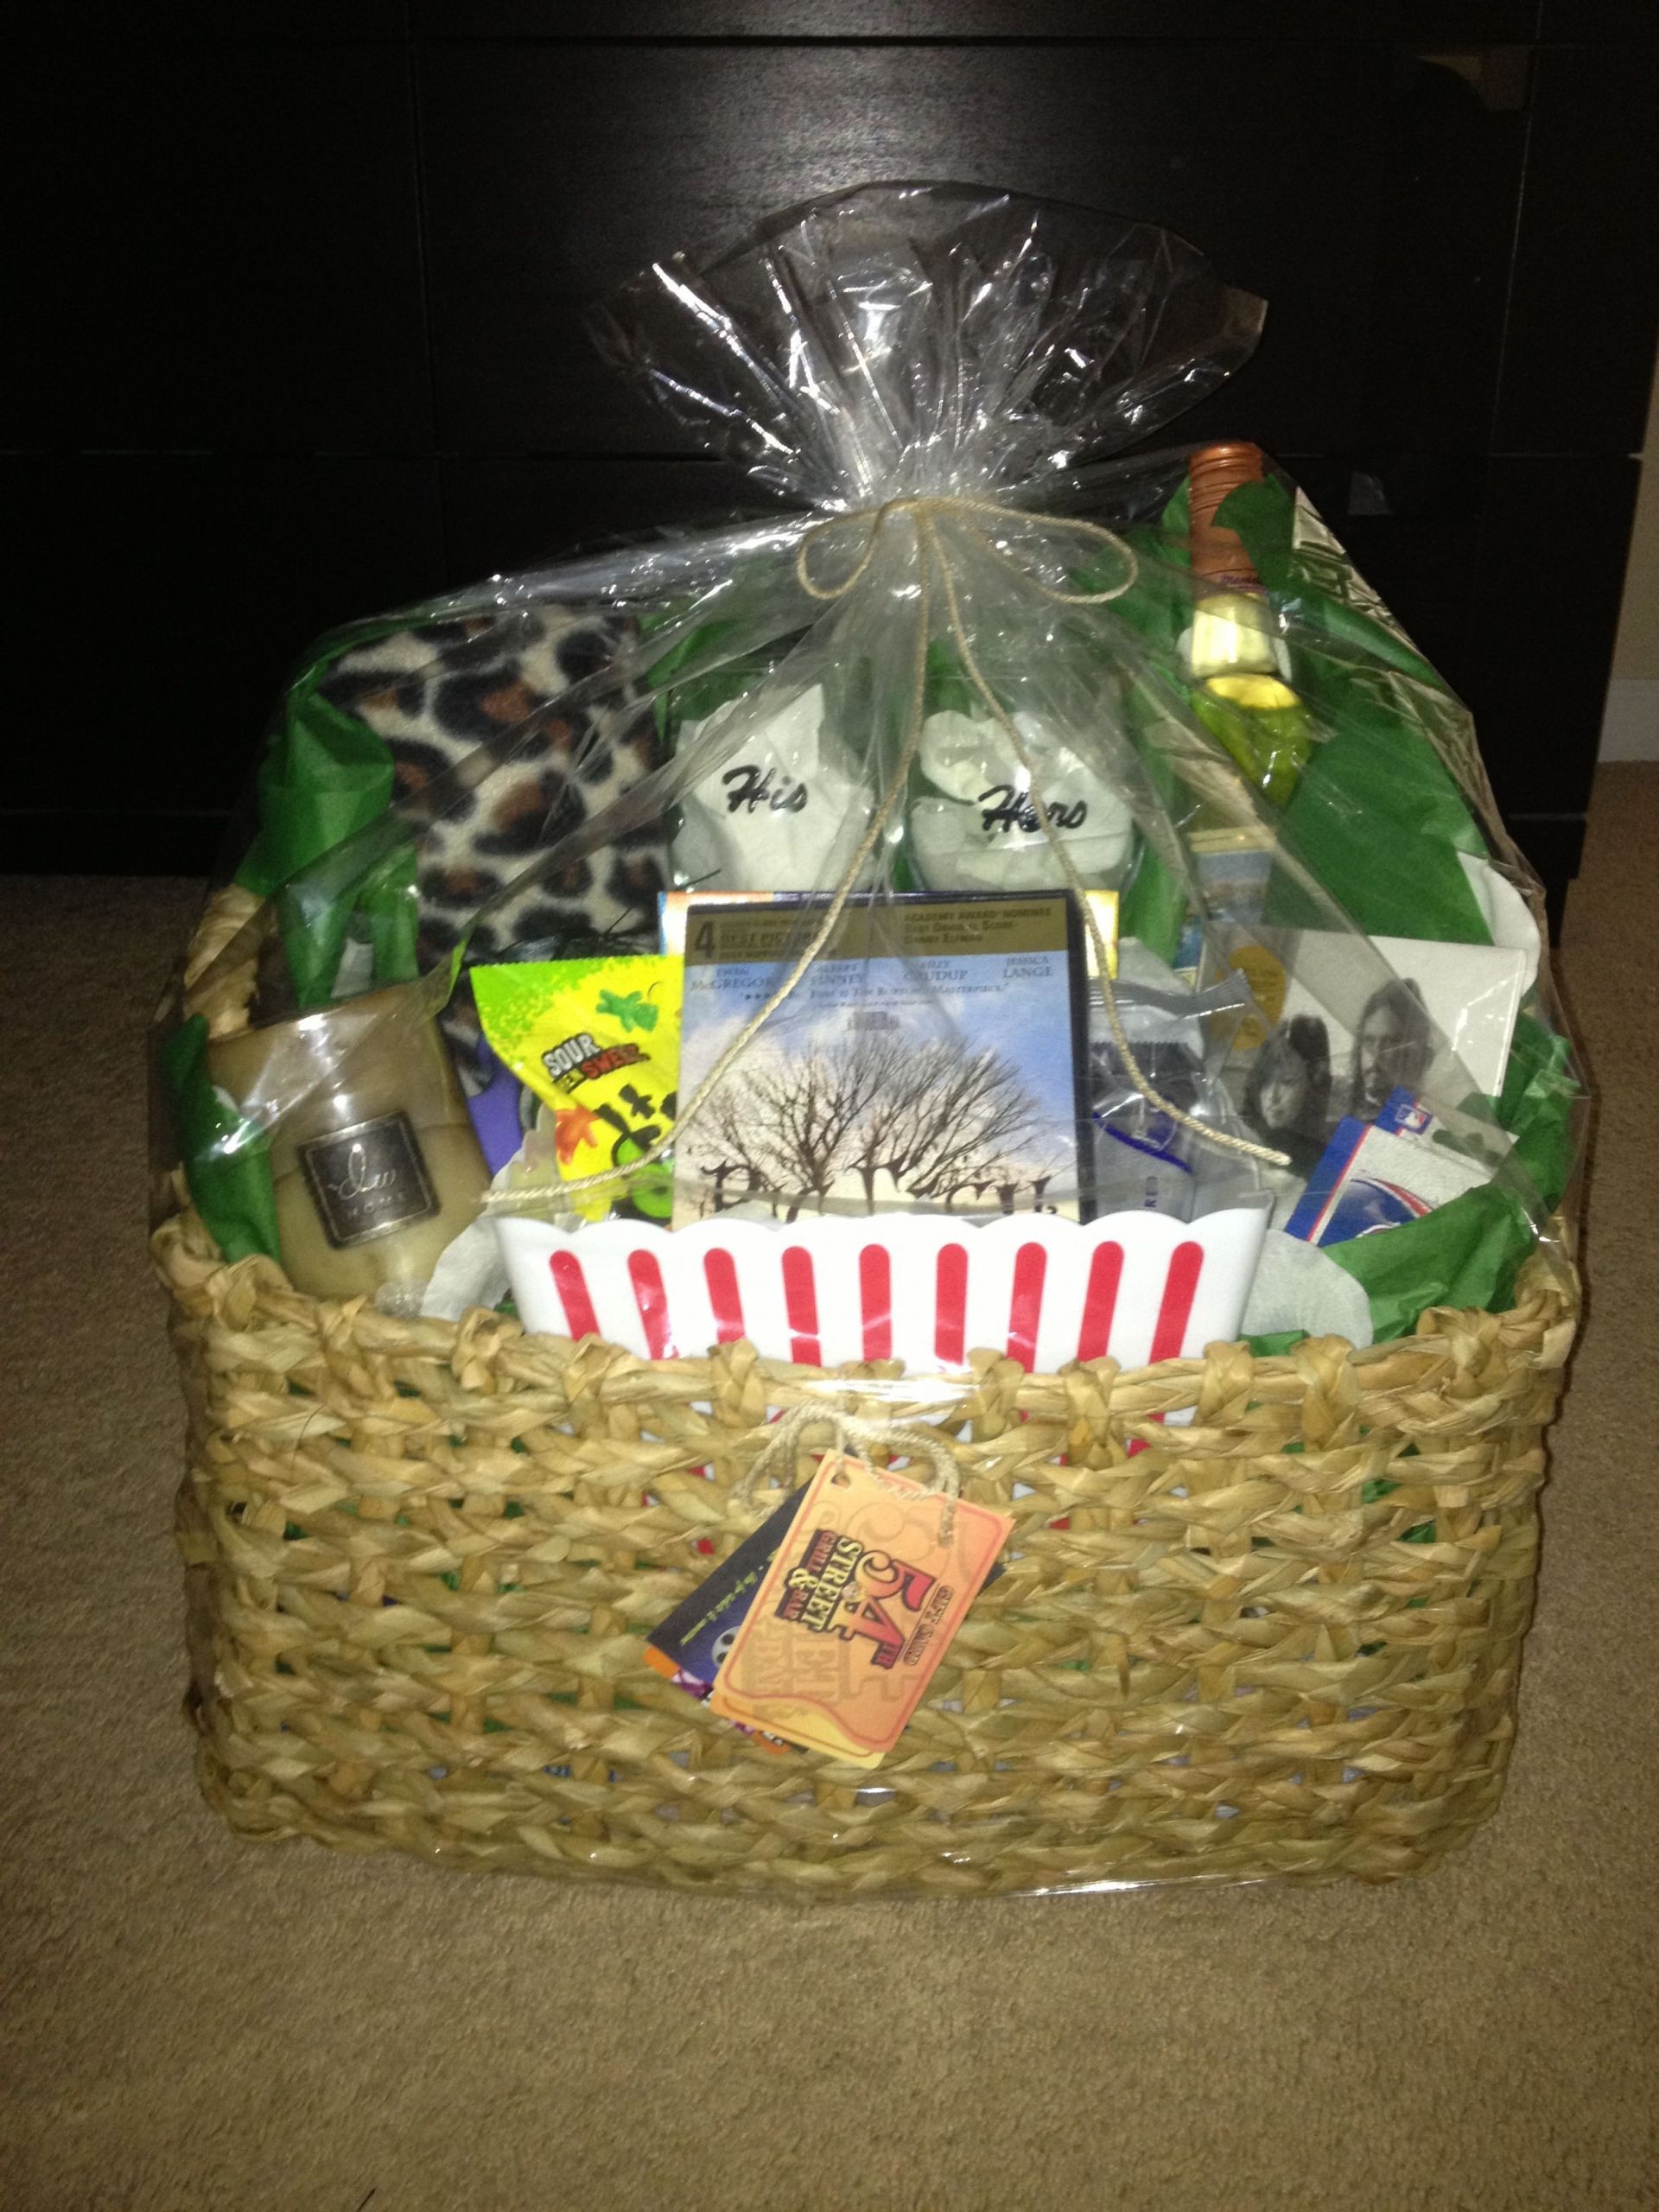 Couple Shower Gift Ideas
 Date night basket I made for a bridal sh Basket